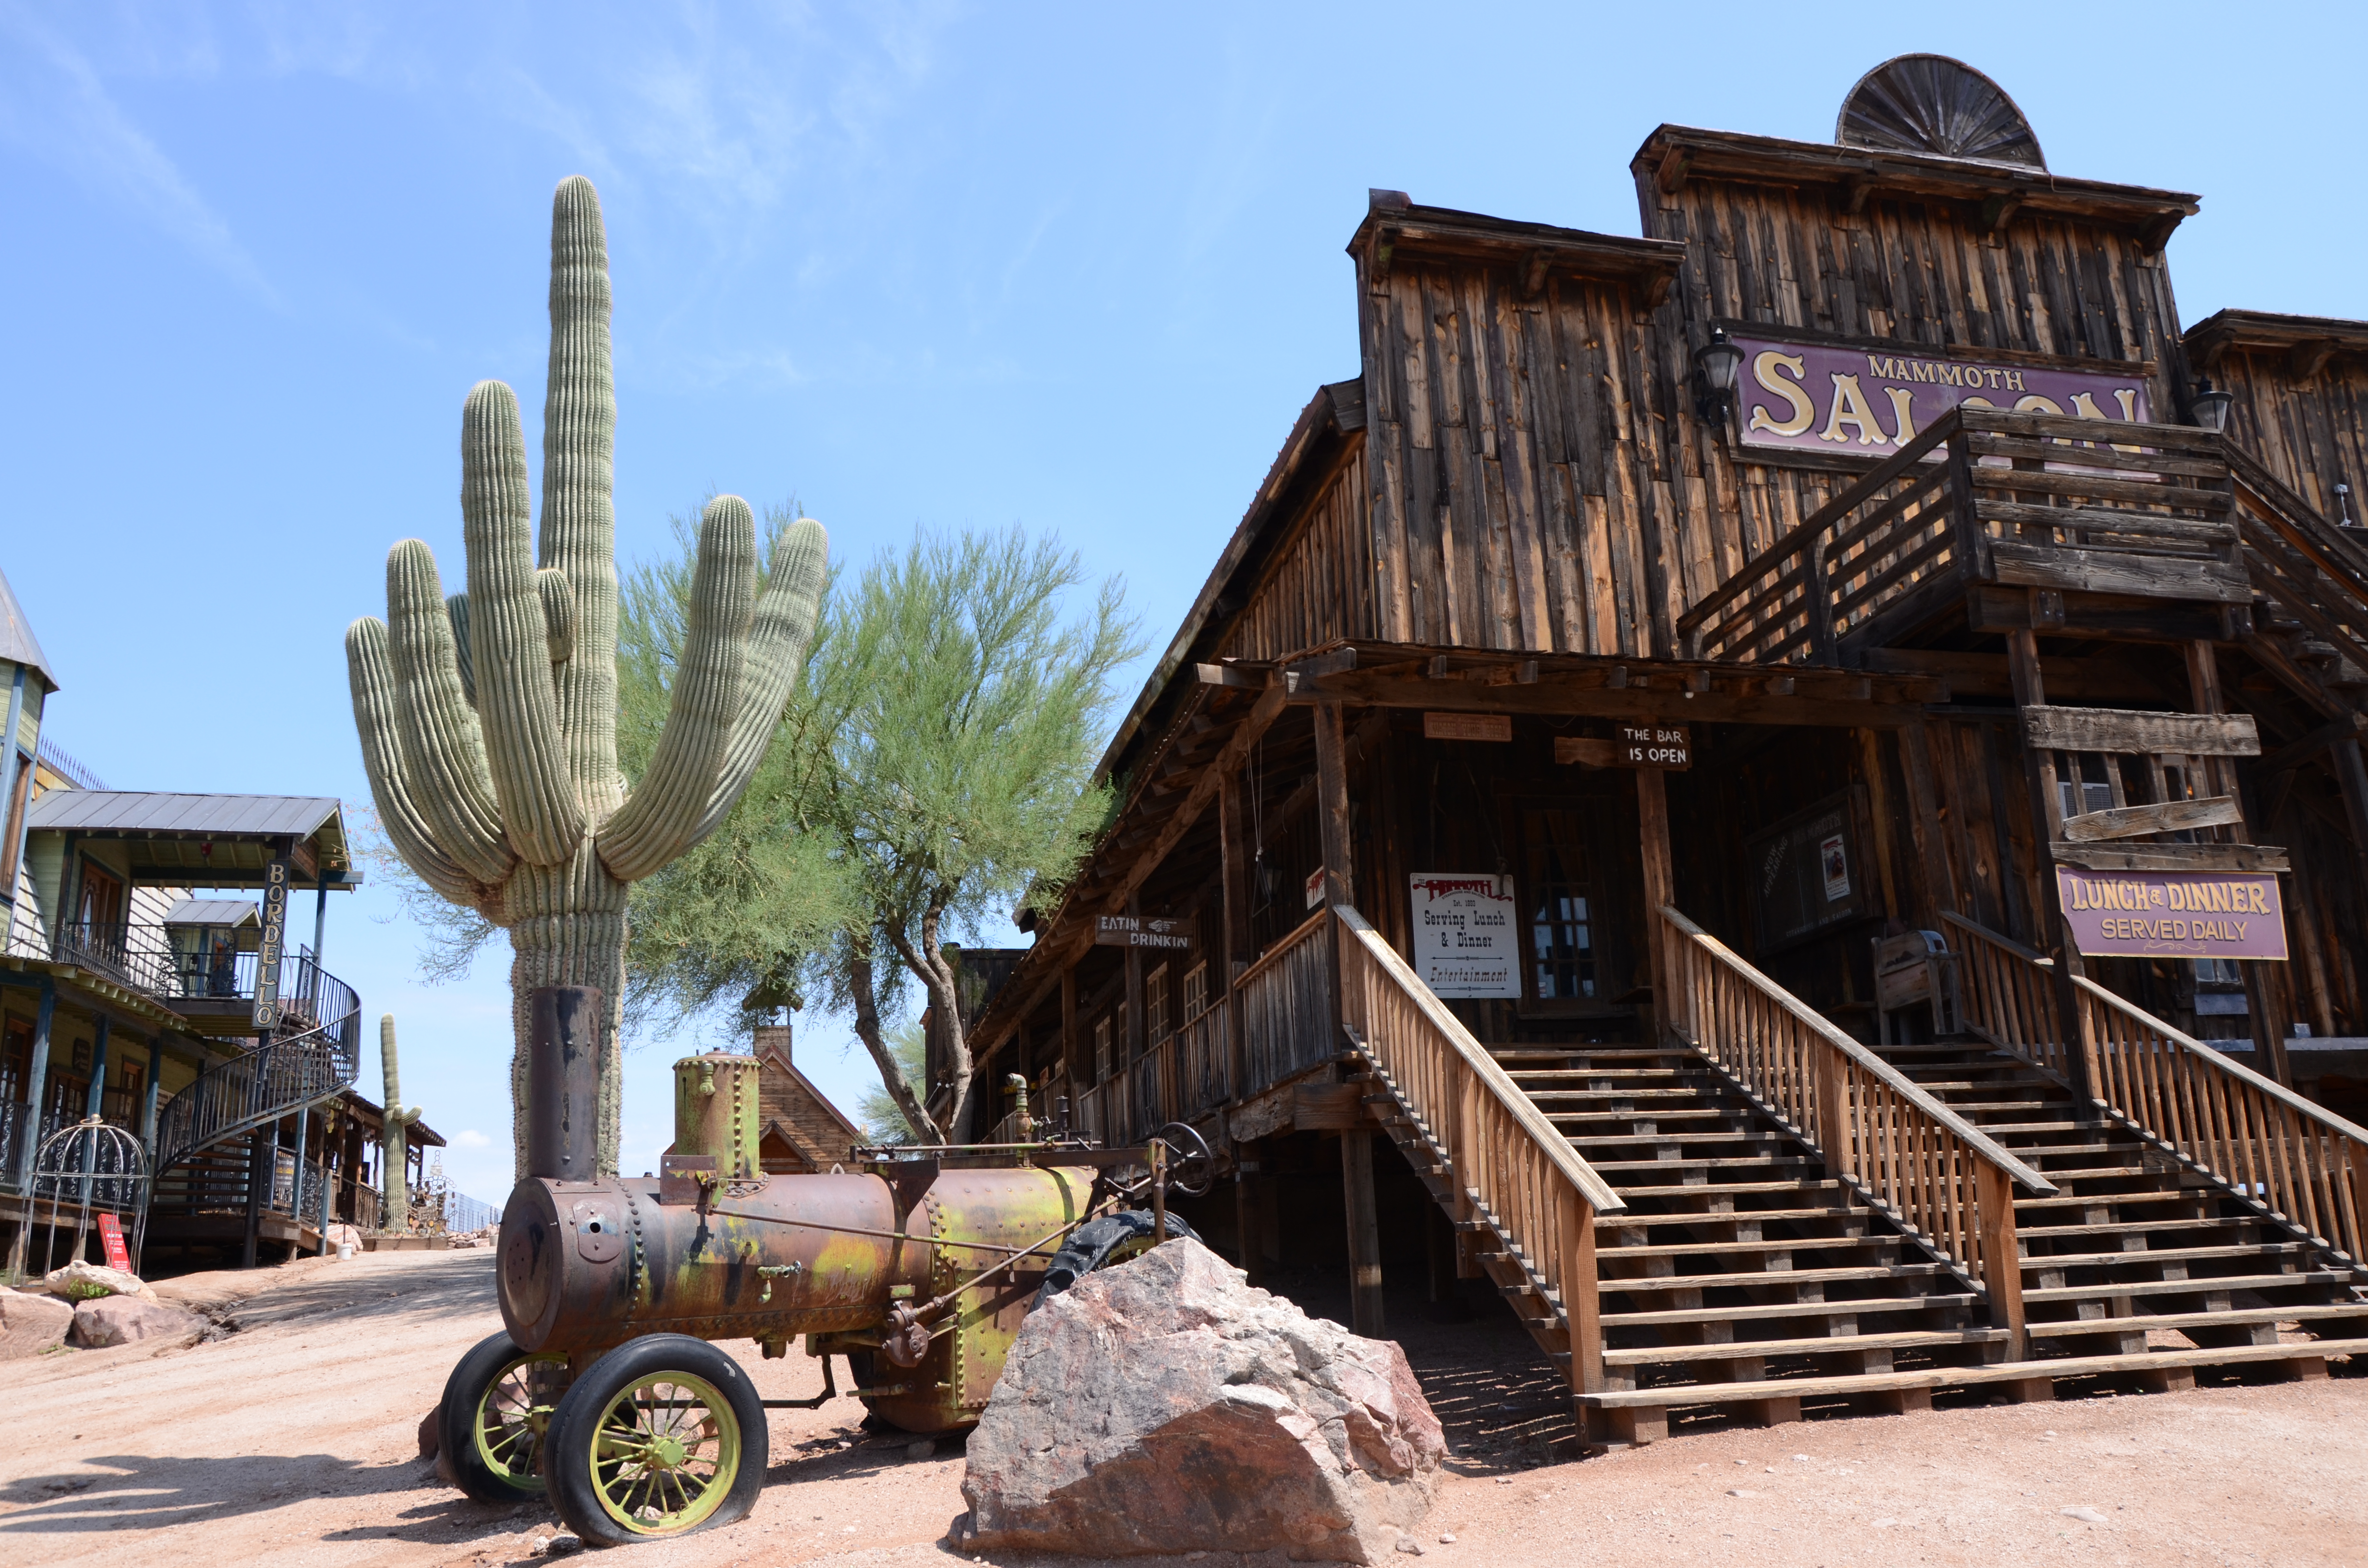 Visiting the Gholdfield Ghost Town with the Coyote Coupon Book 